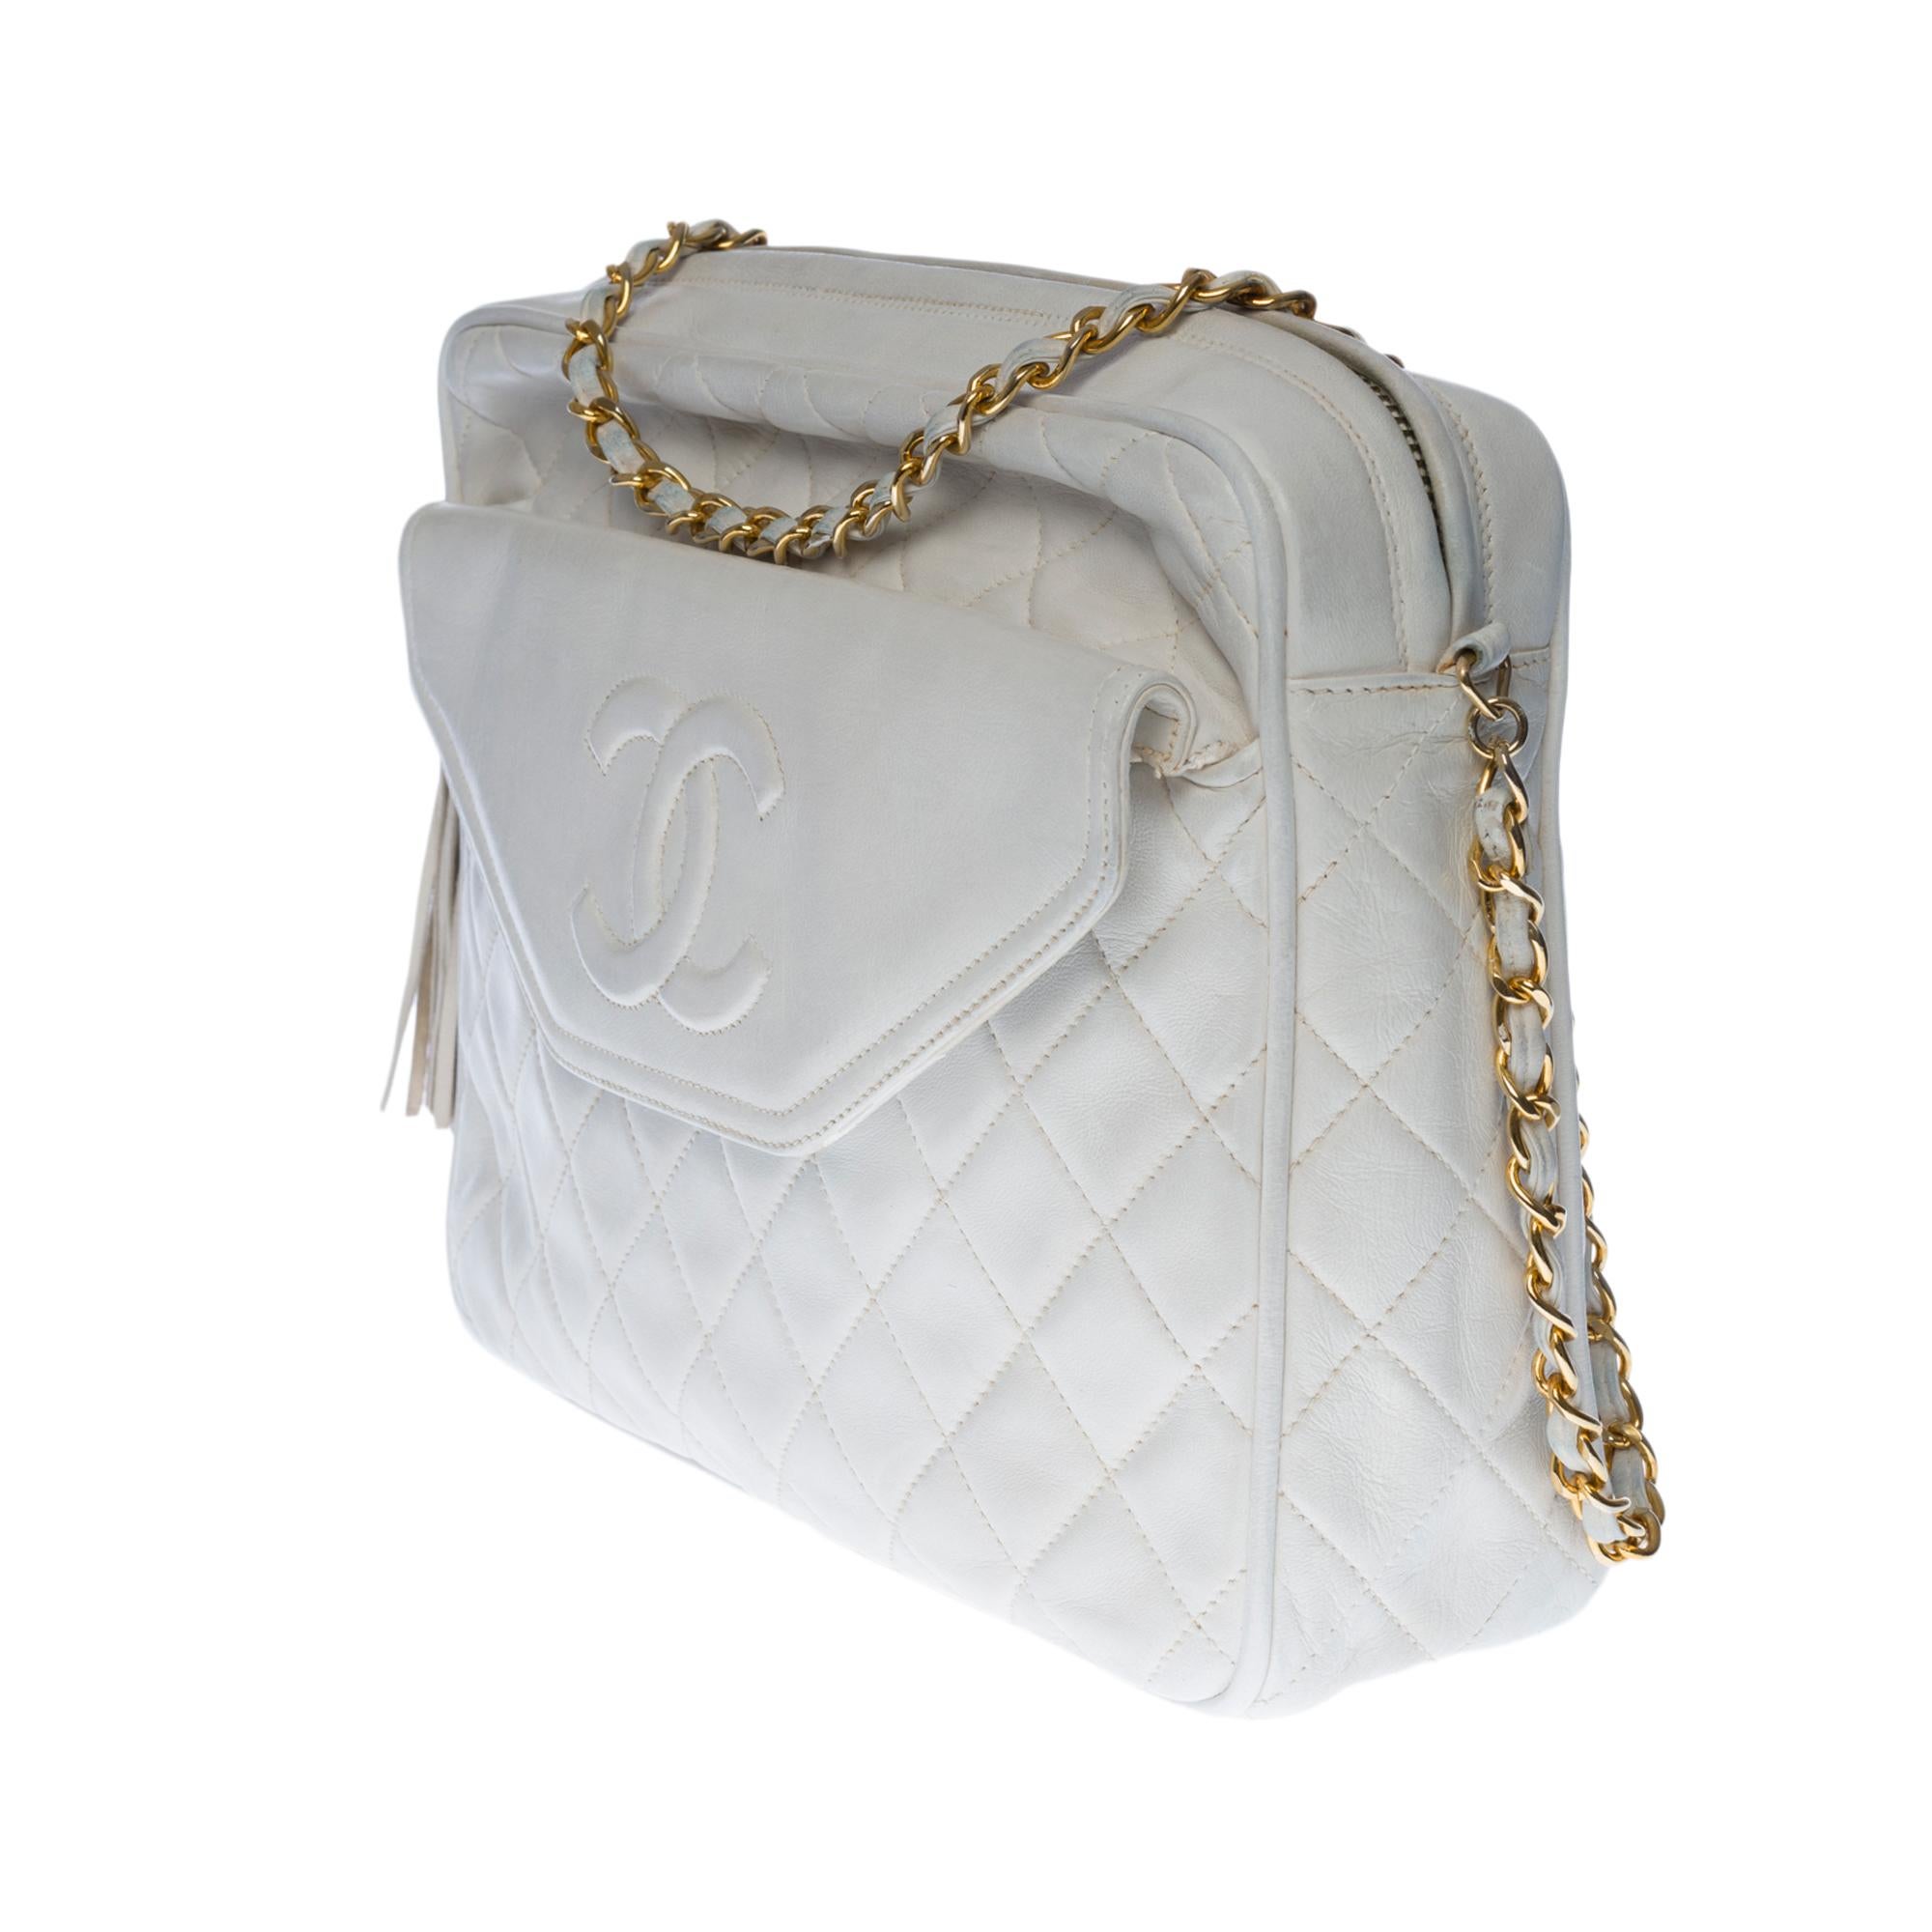 Gray Amazing Chanel Camera shoulder bag in White quilted leather, GHW